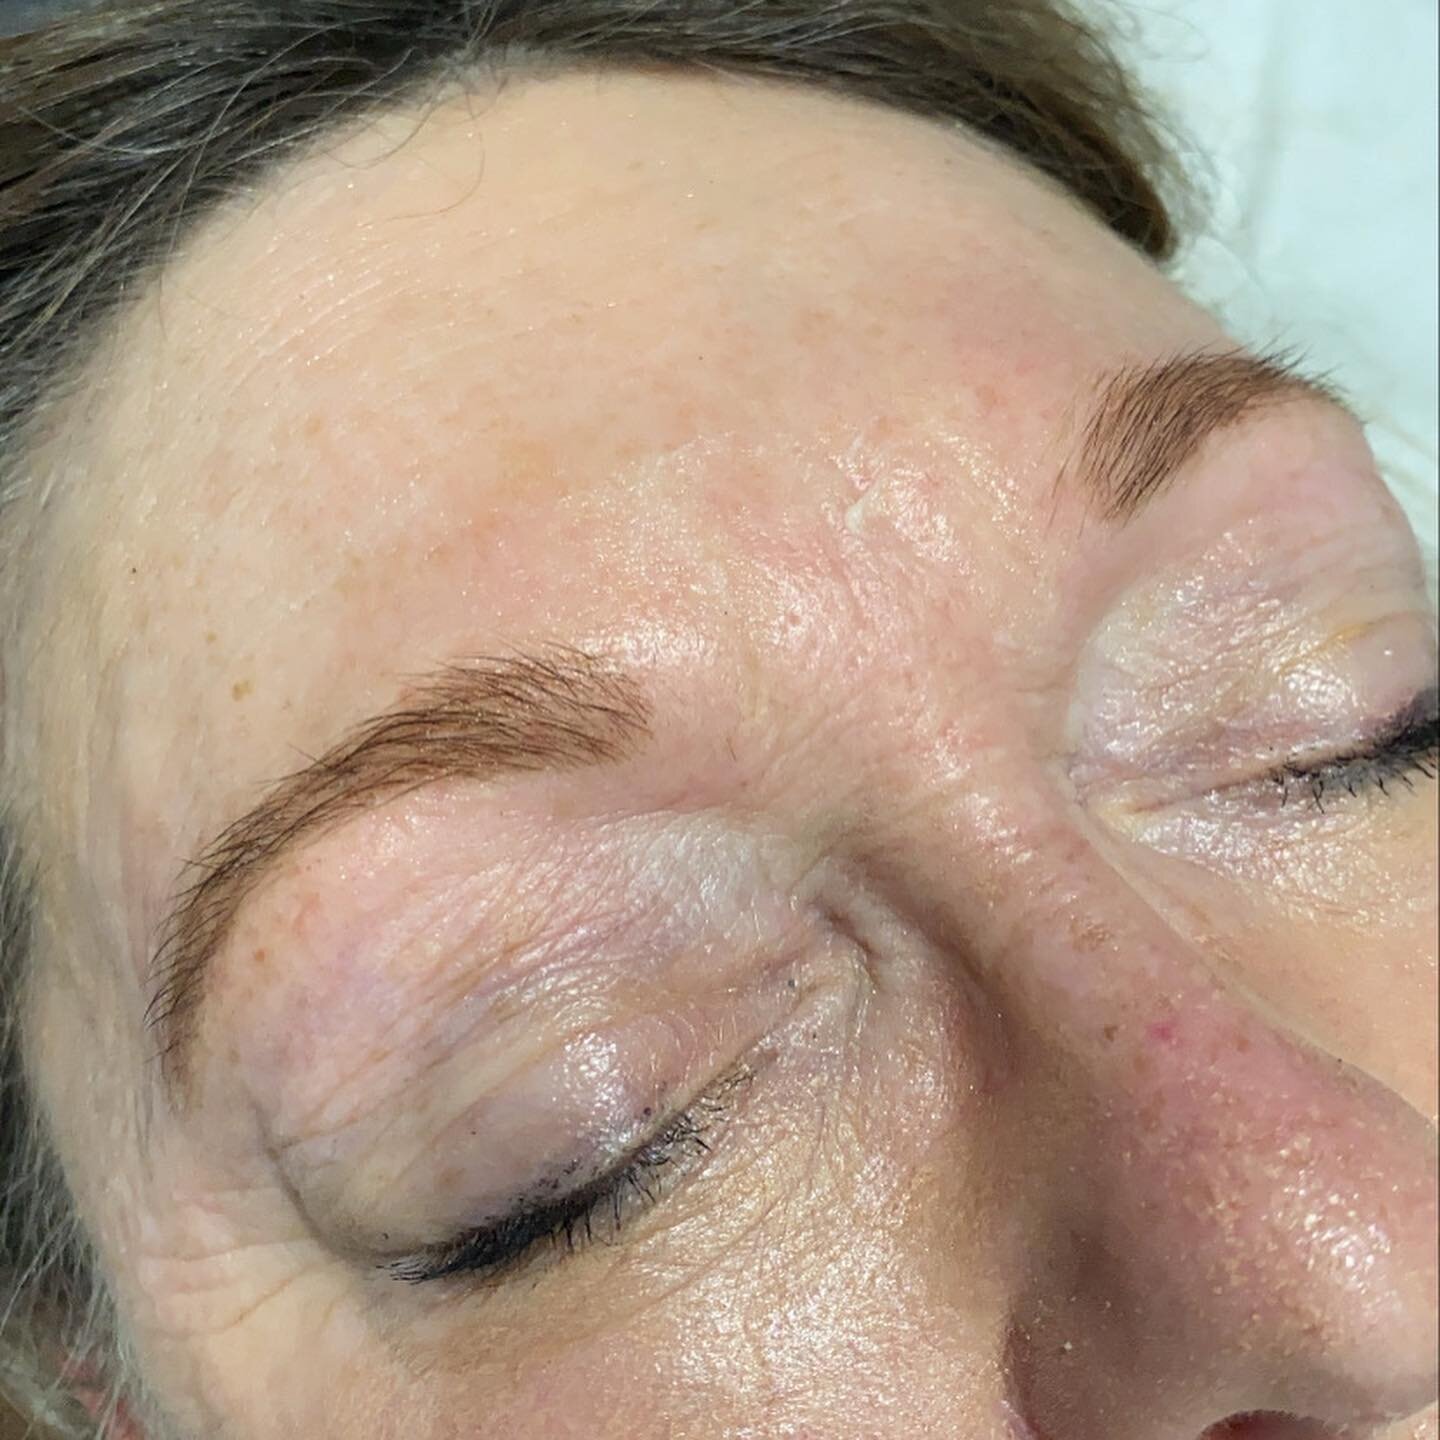 No brows?? No problem!!

Henna brow transformation!! Pain free, lasting up to 6 weeks on the hair!! All natural products 🌱 
⠀⠀⠀⠀⠀⠀⠀⠀⠀
Swipe 🔙 for before picture !!
.
.
.
.
.
.
.
.
.